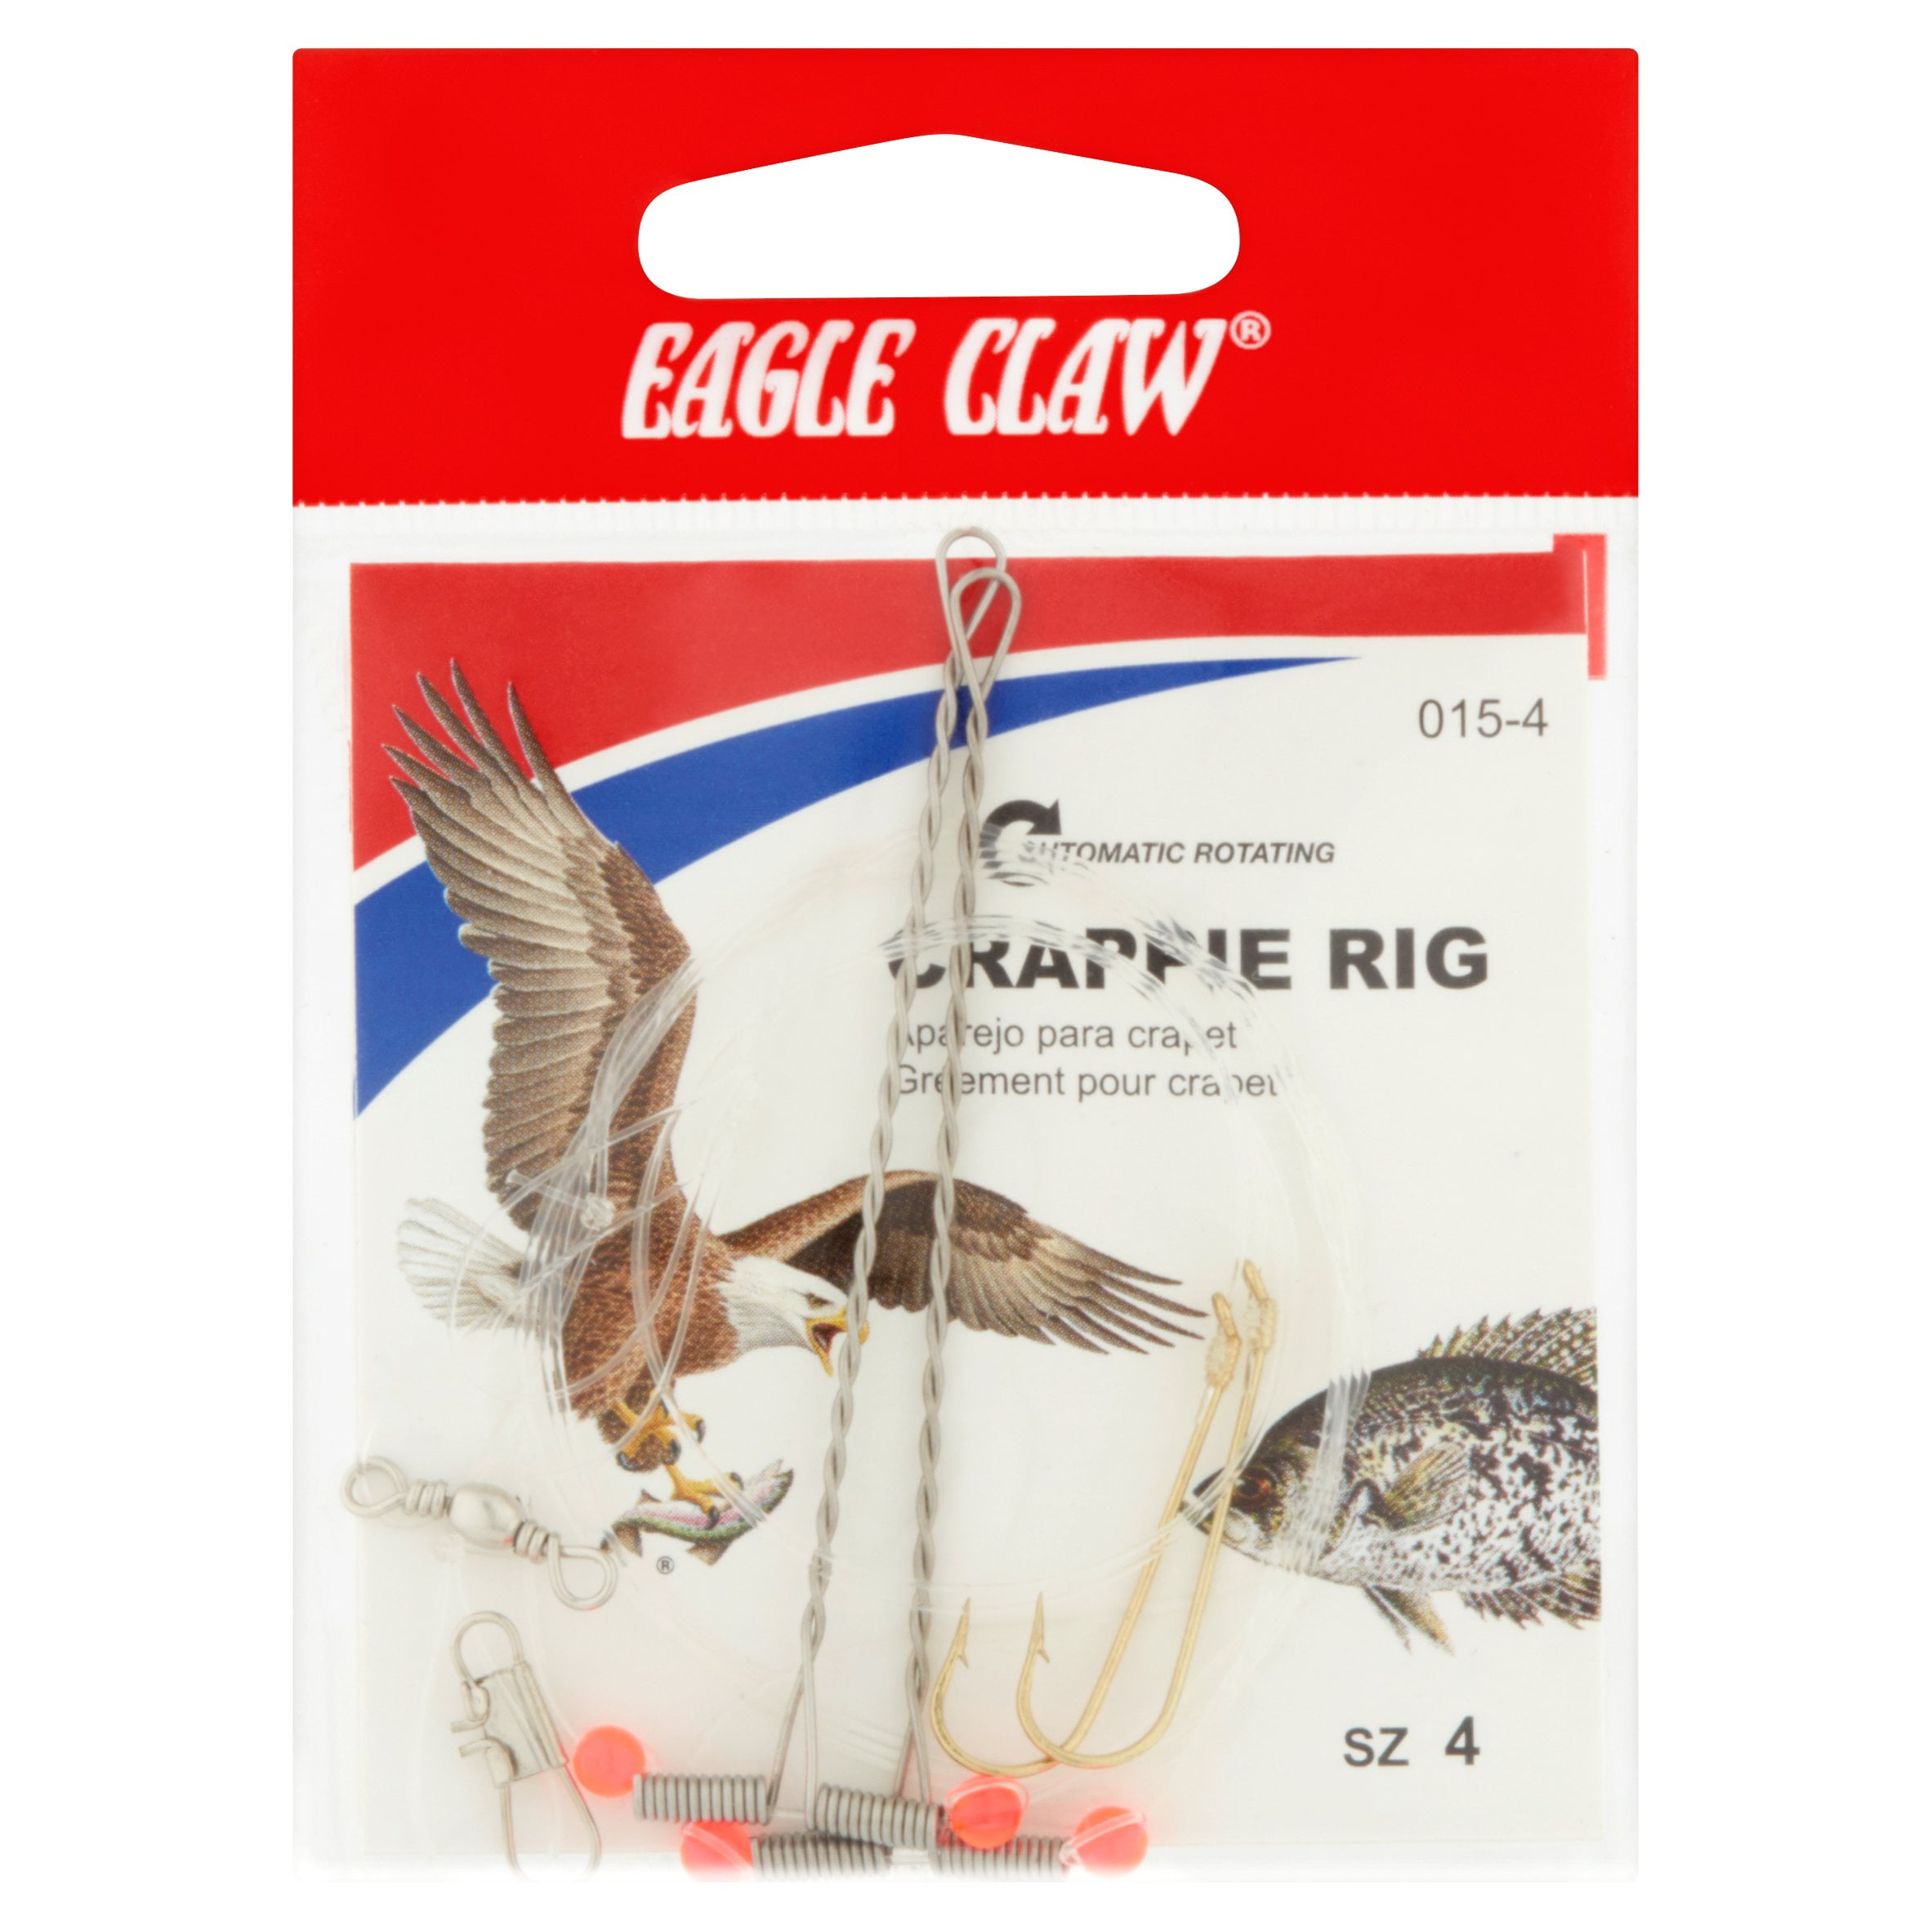 EAGLE CLAW Inline Ice Reel #ECILIR FREE USA SHIPPING NEW! Crappie, Bass,  Panfish